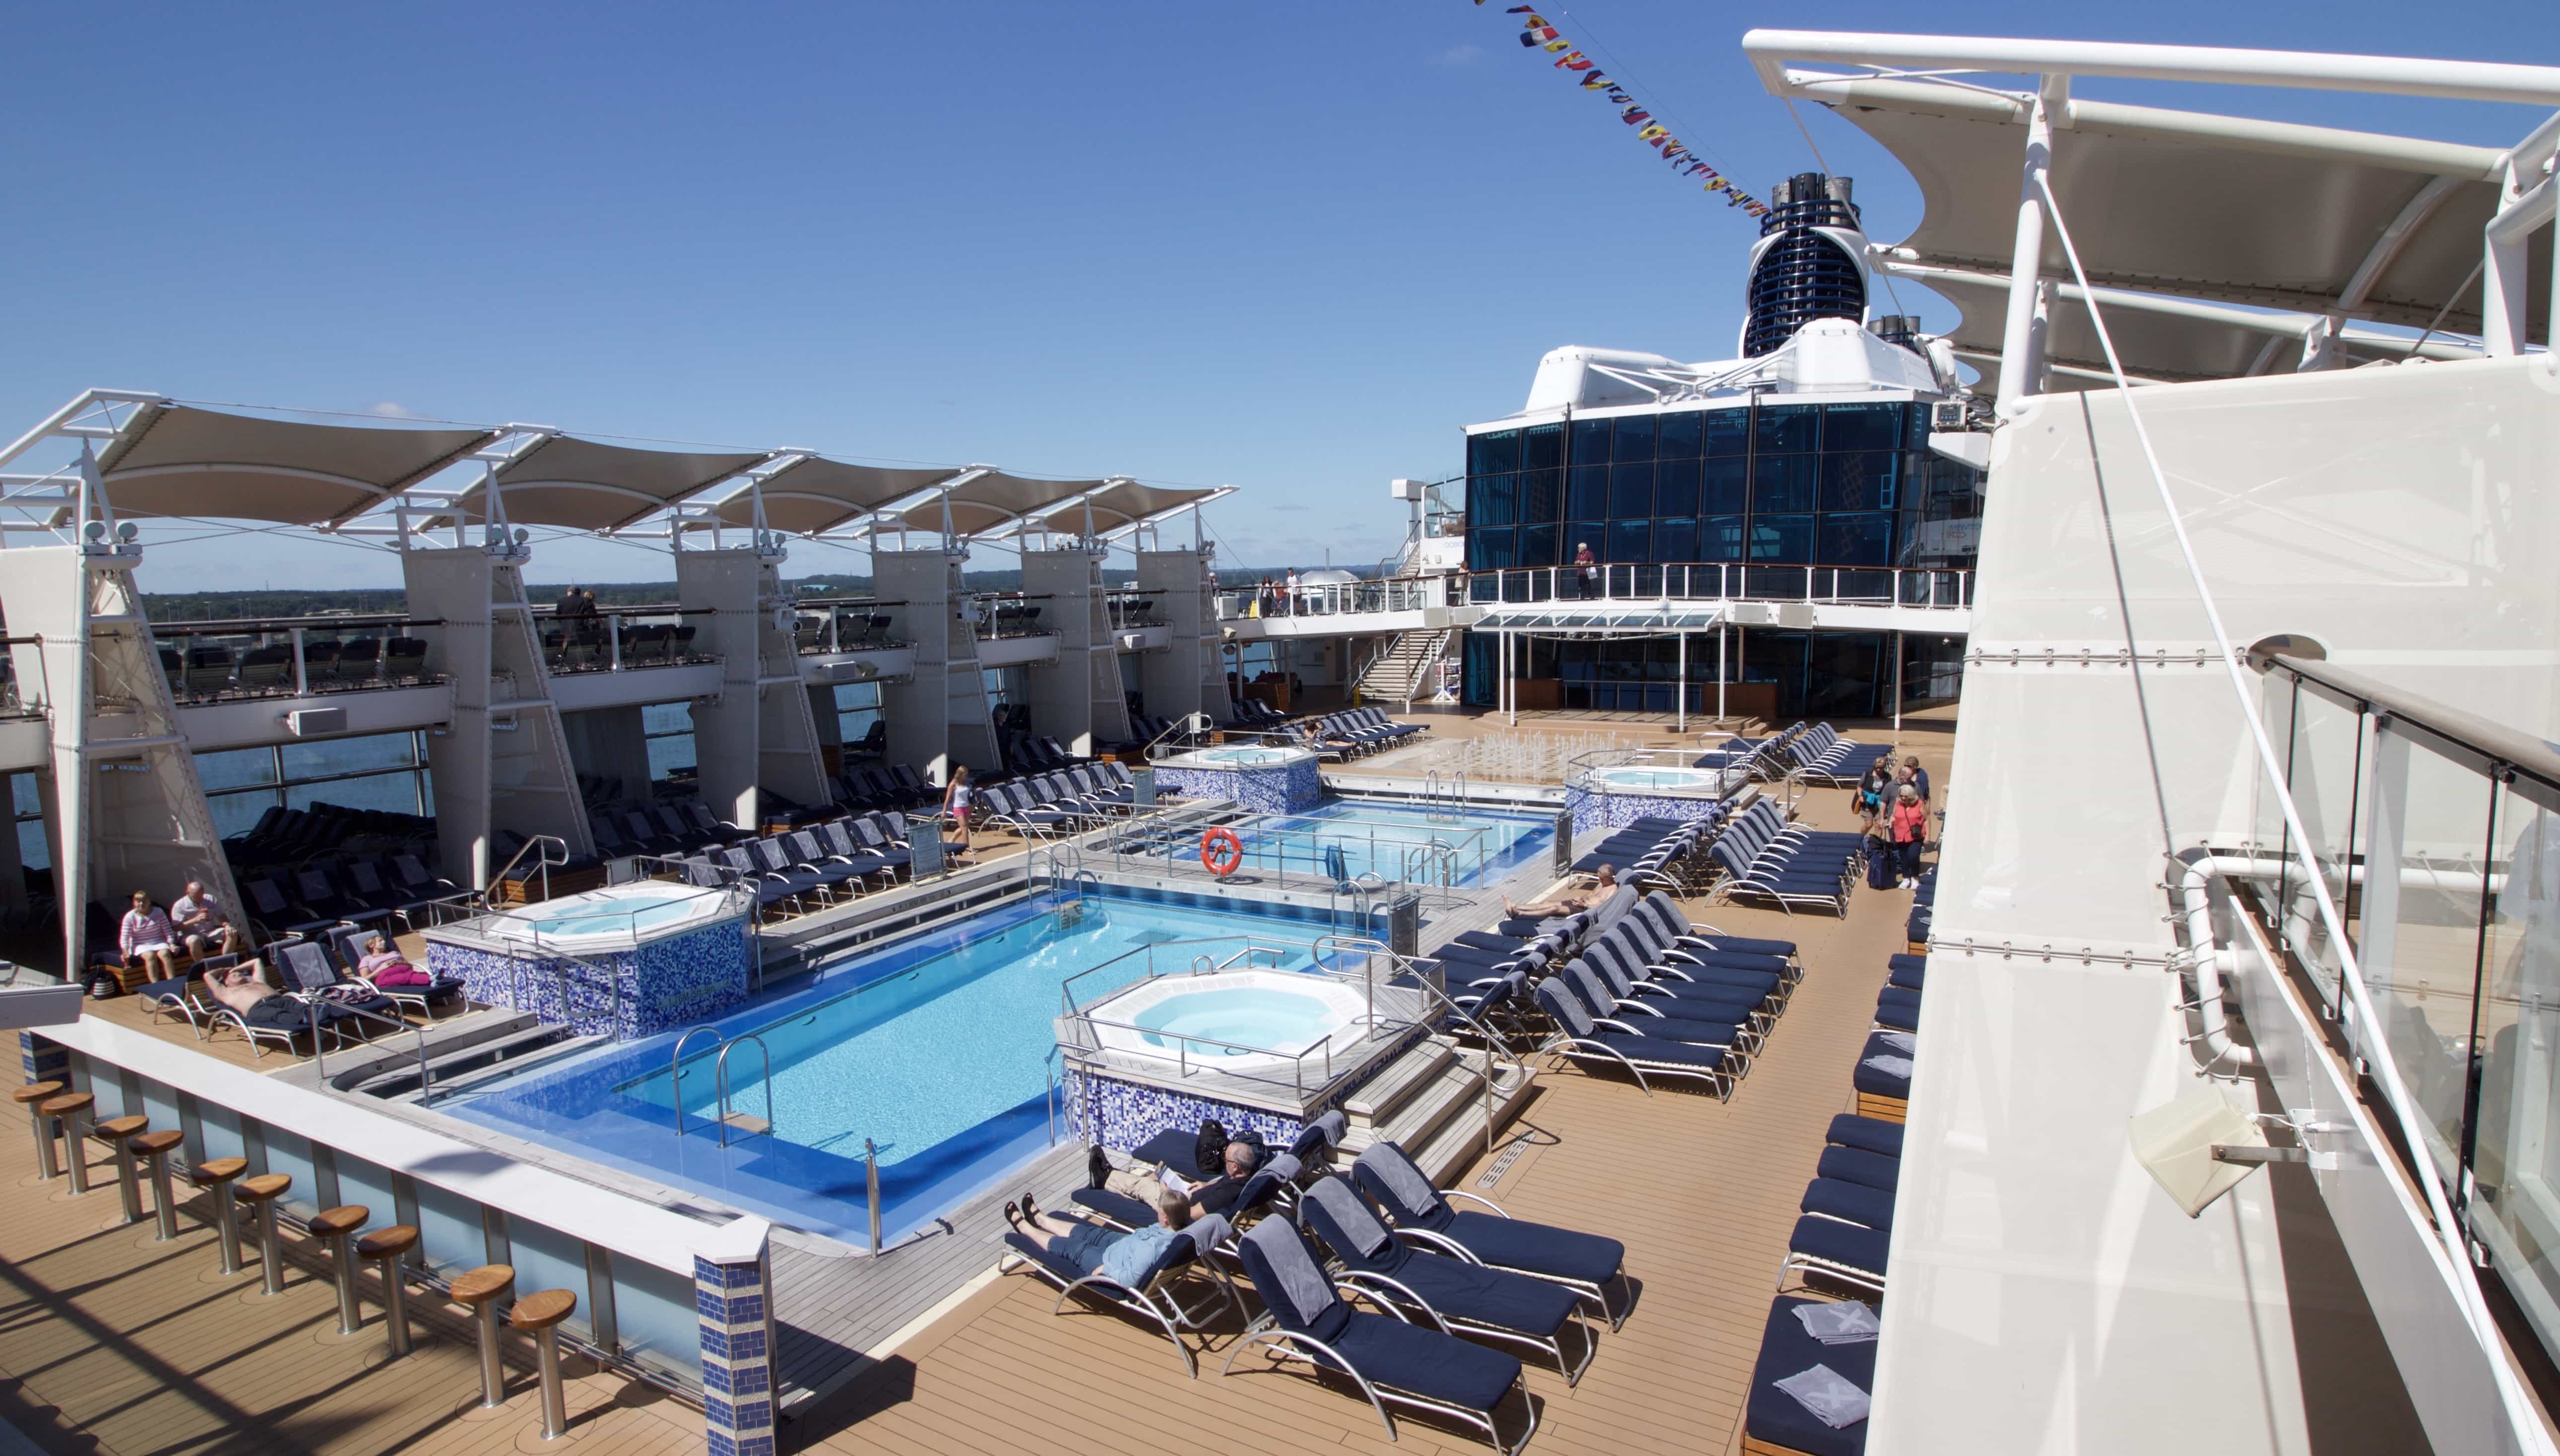 celebrity eclipse top deck pools swimming sun bathing